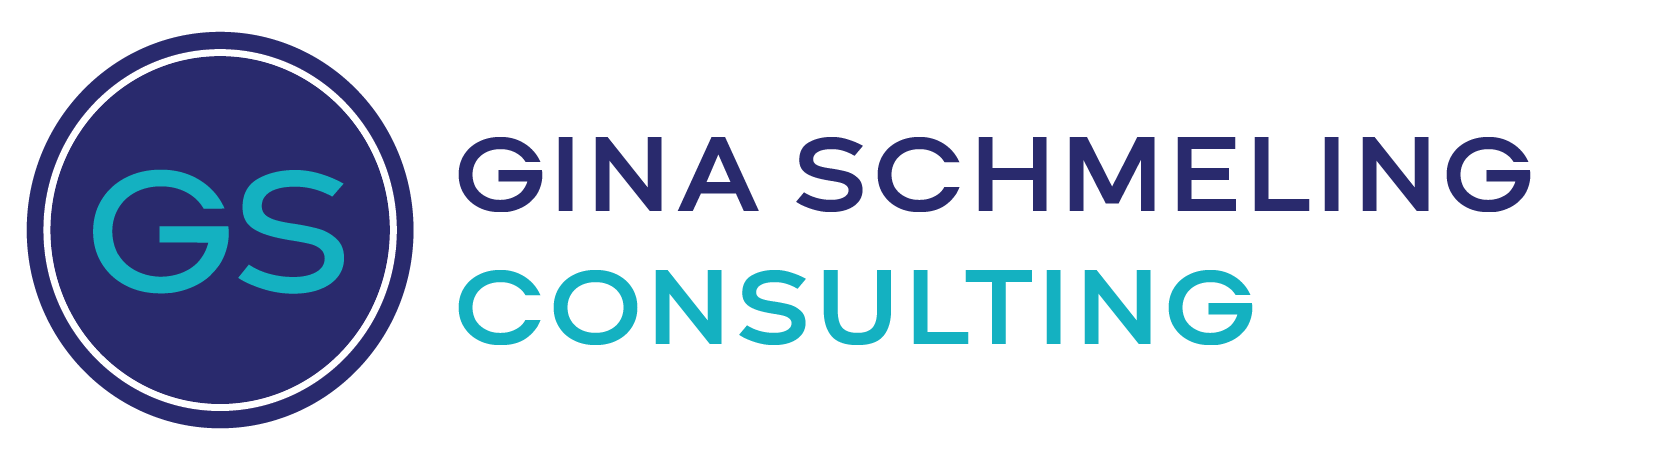 Gina Schmeling Consulting